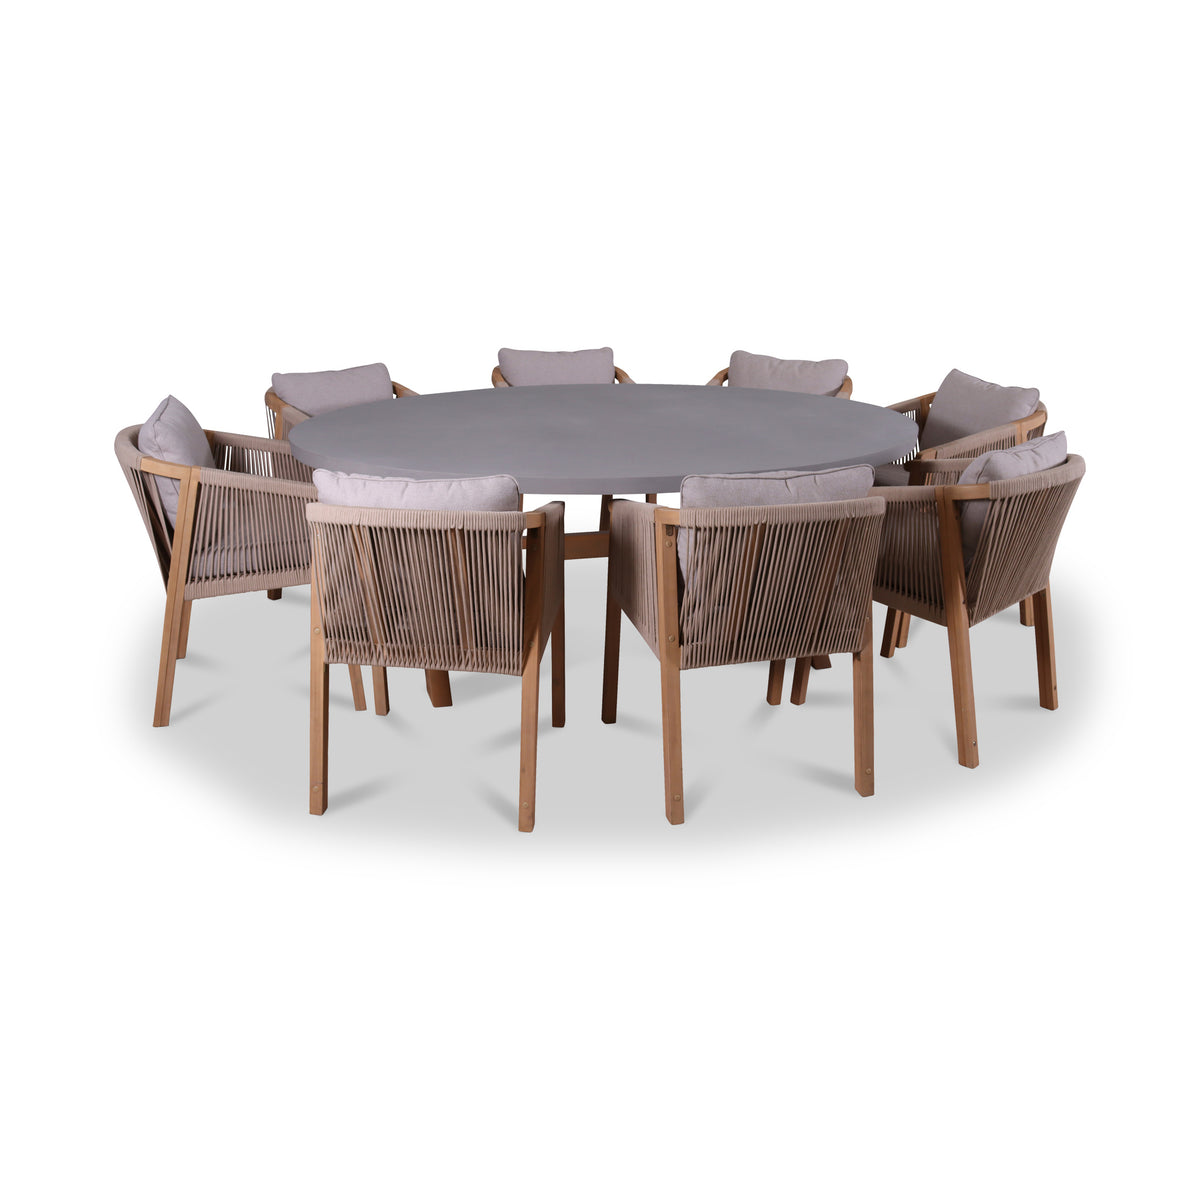 Luna Ellipse Concrete Table Set with 8 Chairs from Roseland Furniture